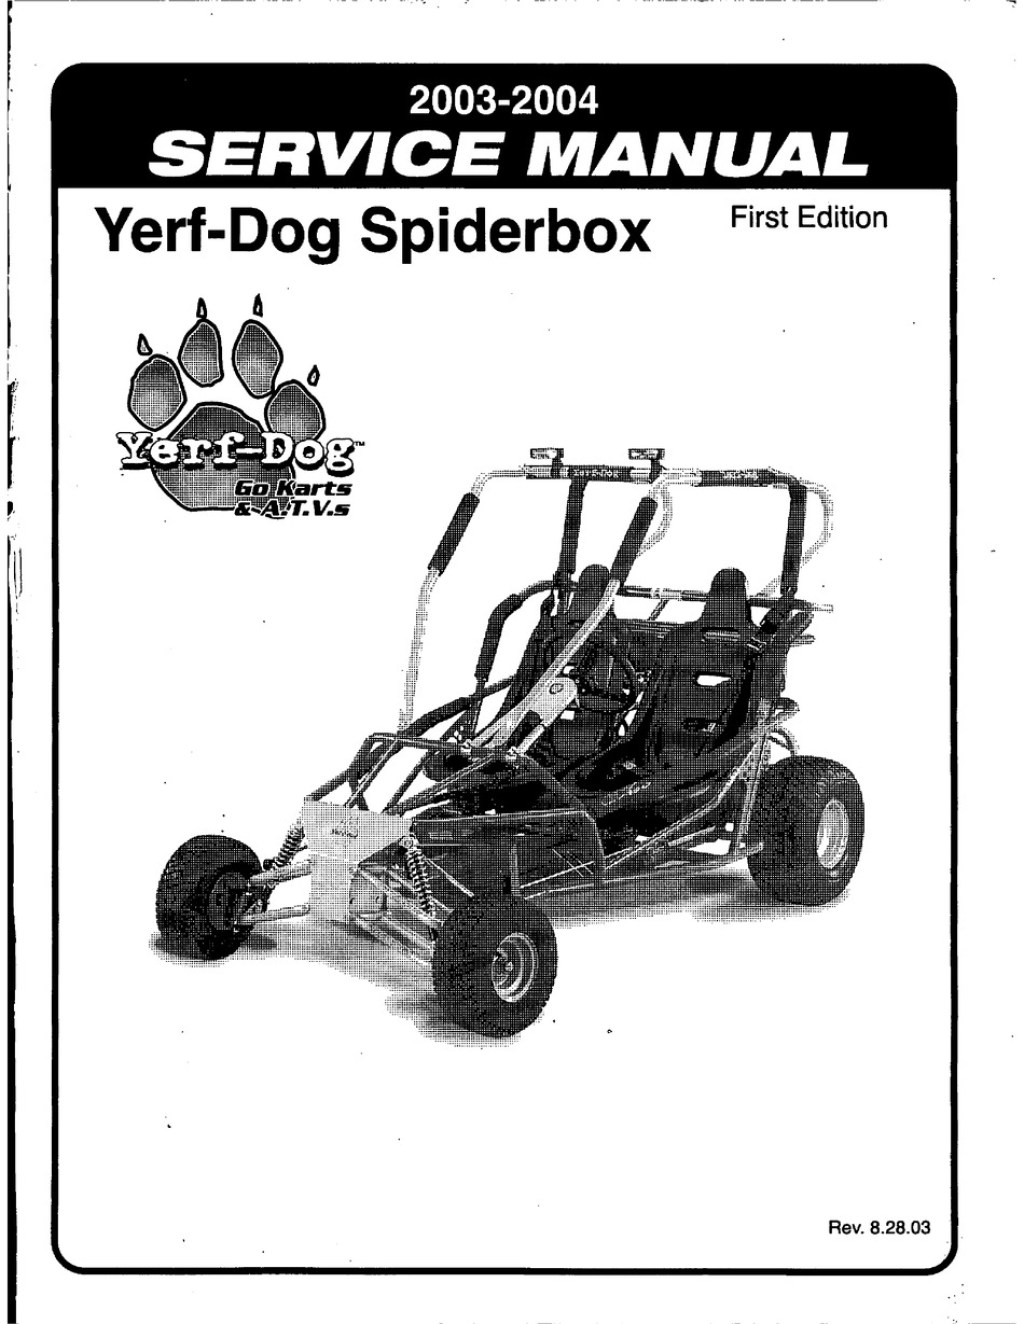 Picture of: YERF-DOG SPIDERBOX  SERVICE MANUAL Pdf Download  ManualsLib